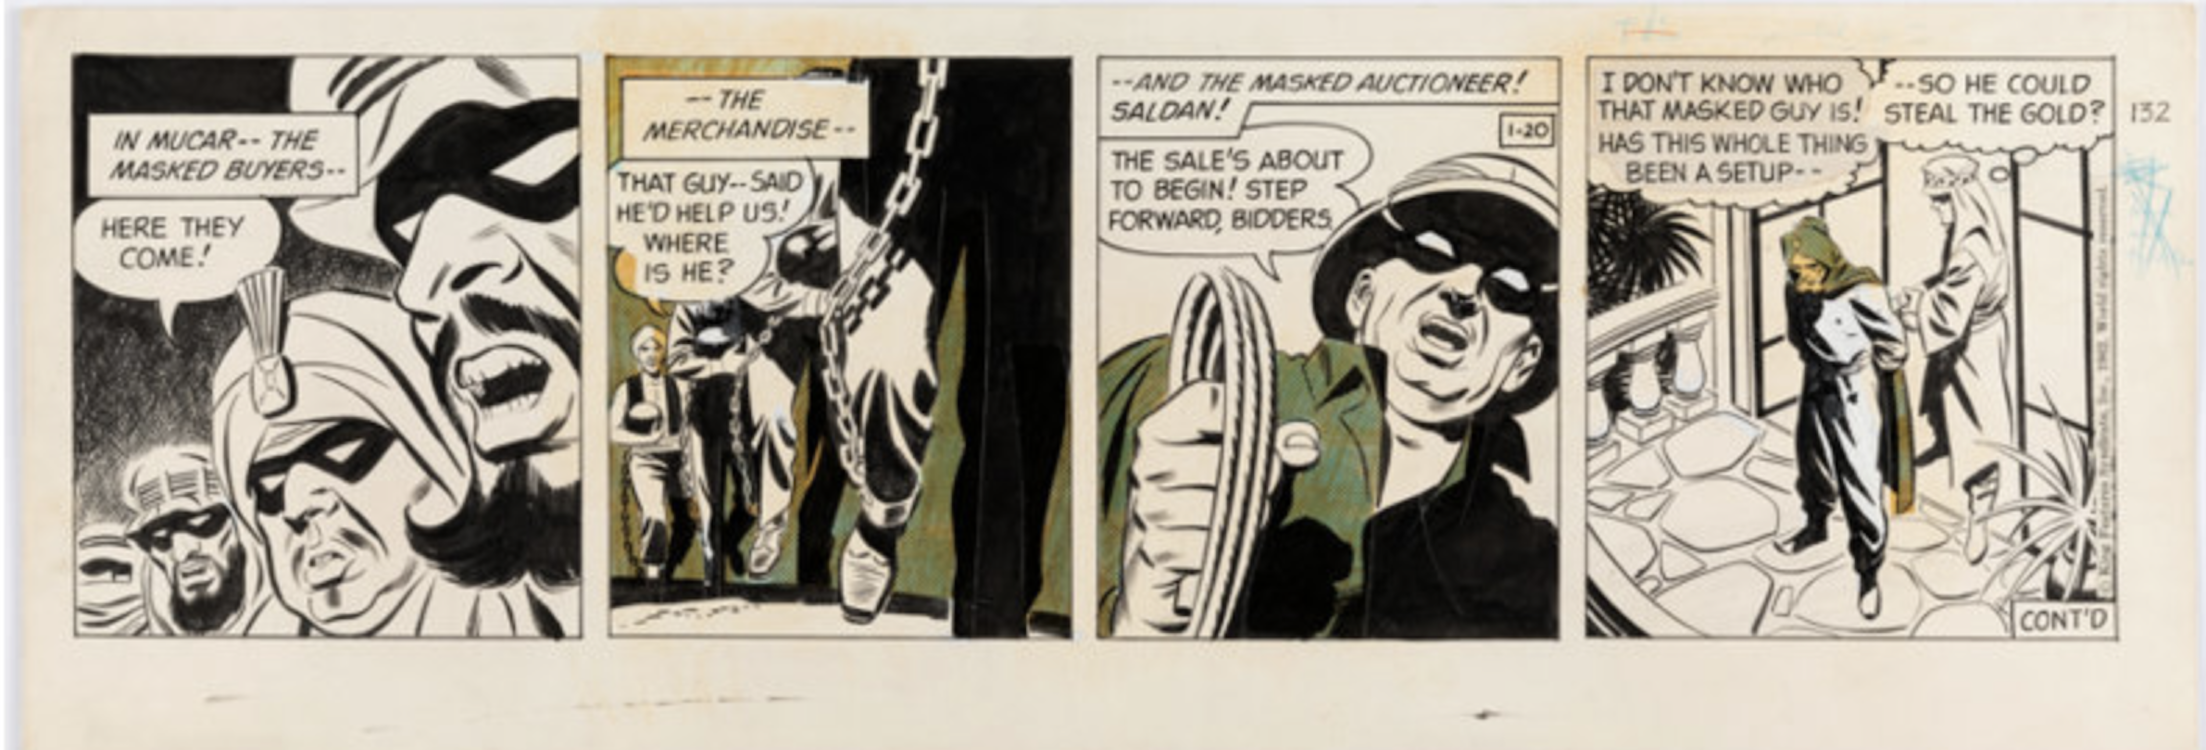 The Phantom Daily Comic Strip 1-20-62 by Sy Barry sold for $145. Click here to get your original art appraised.